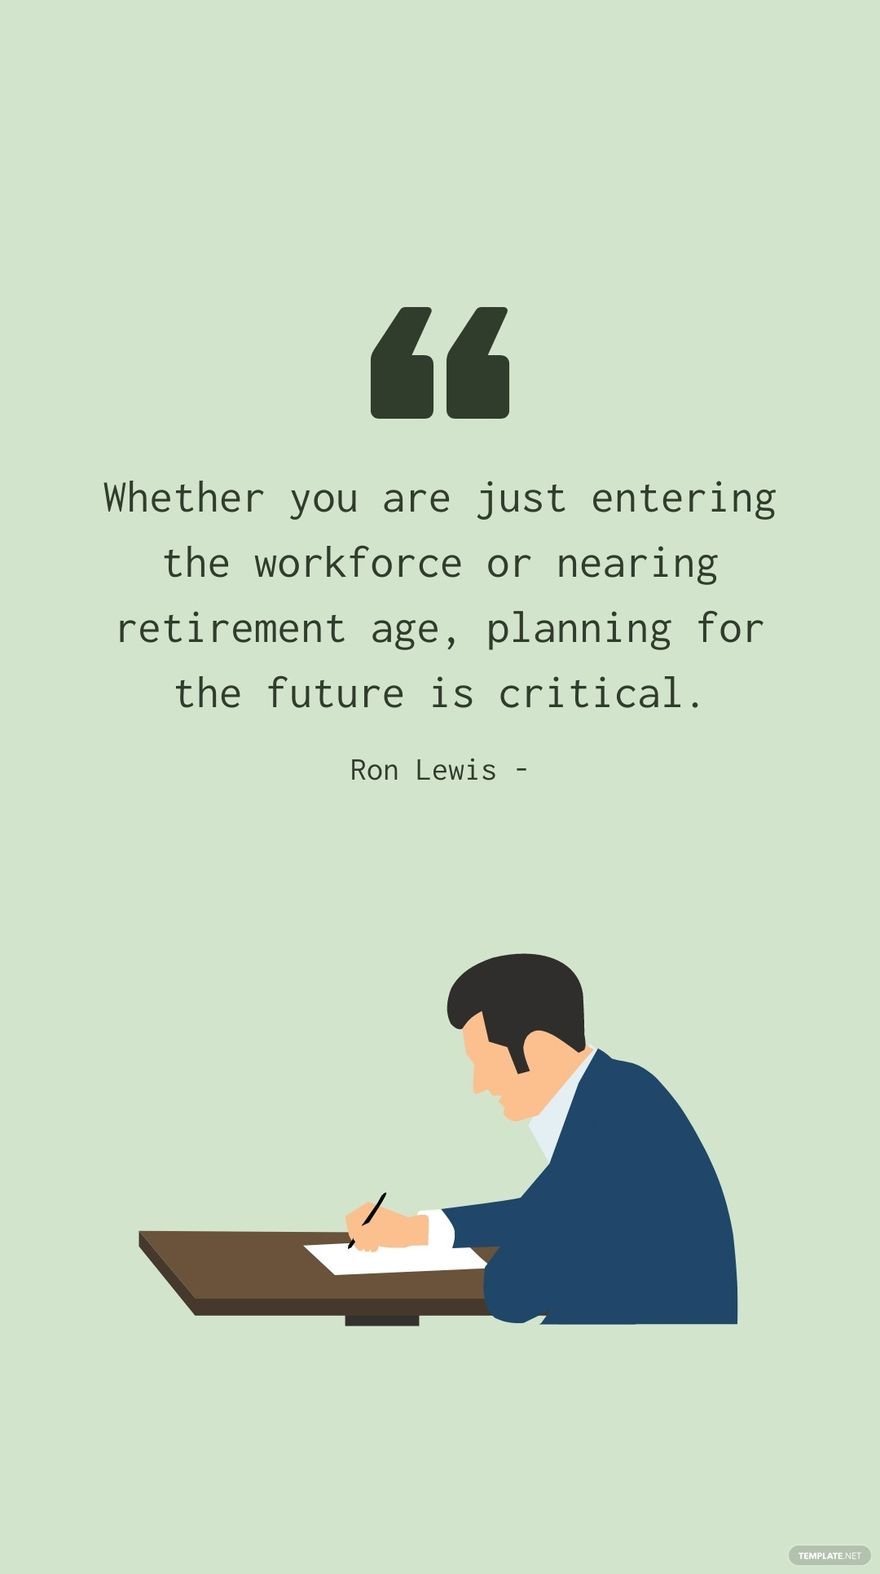 Free Ron Lewis - Whether you are just entering the workforce or nearing retirement age, planning for the future is critical. in JPG